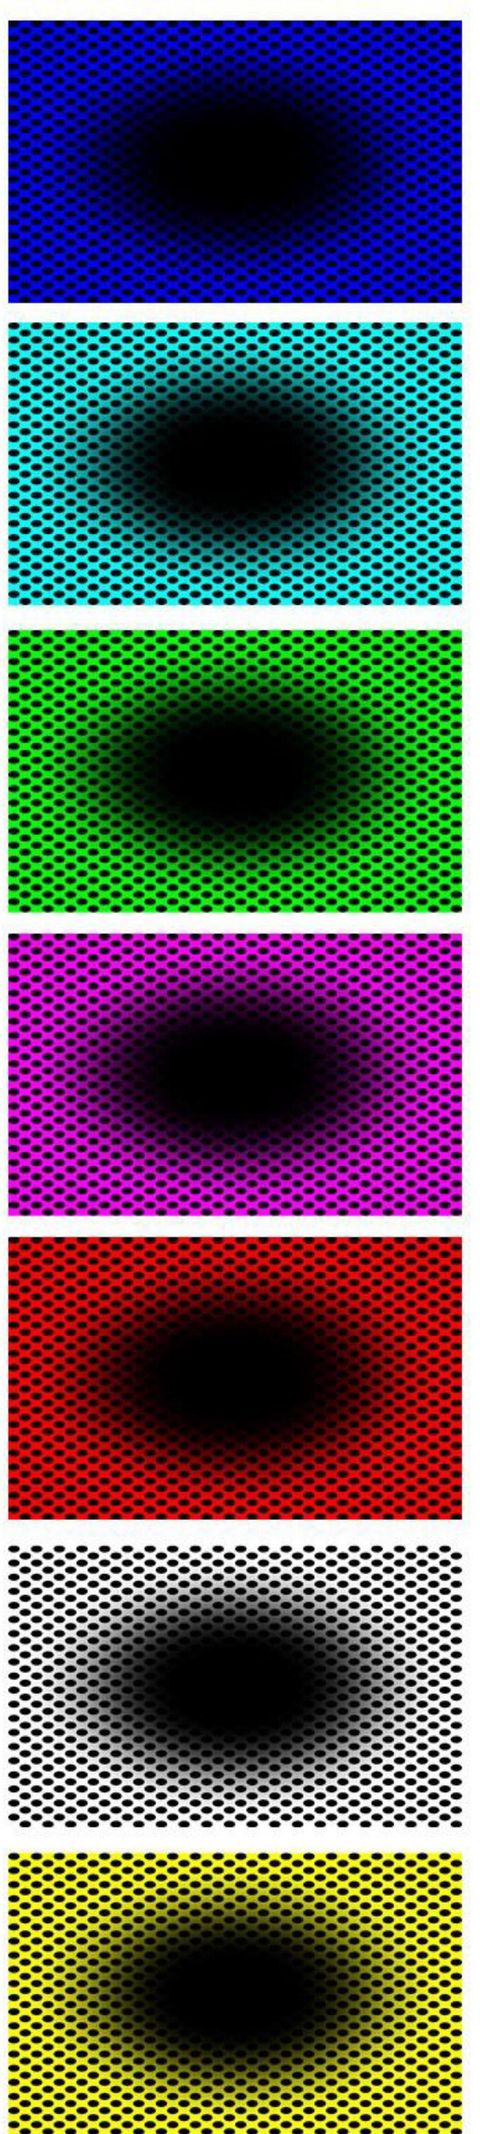 black hole illusion on different color gradient backgrounds